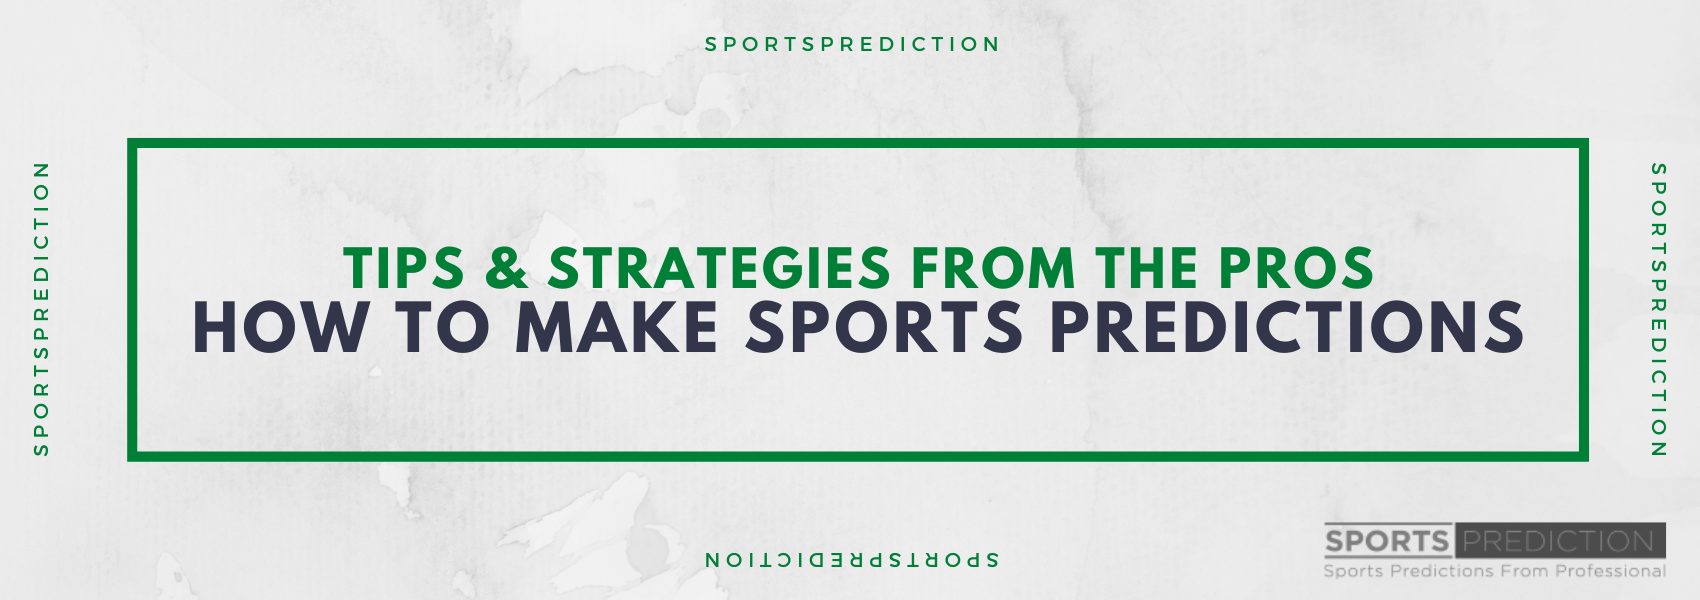 How To Make Sports Predictions: Tips & Strategies From The Pros